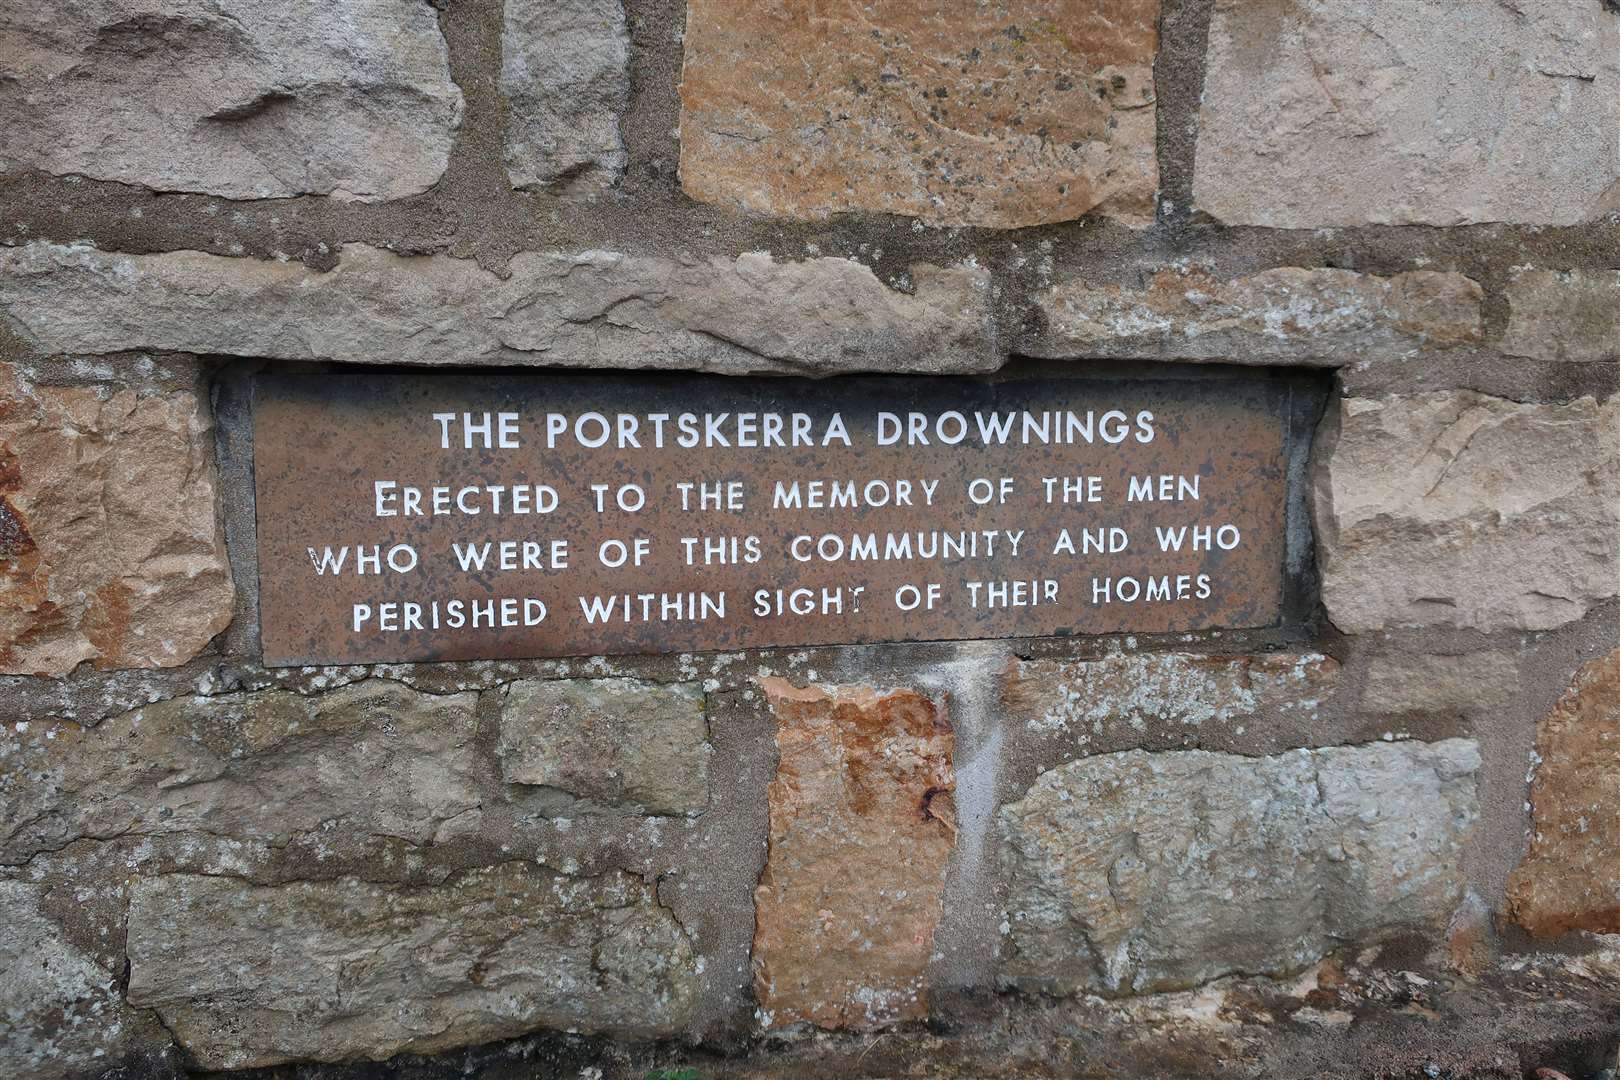 Close-up of the Portskerra Drownings memorial.